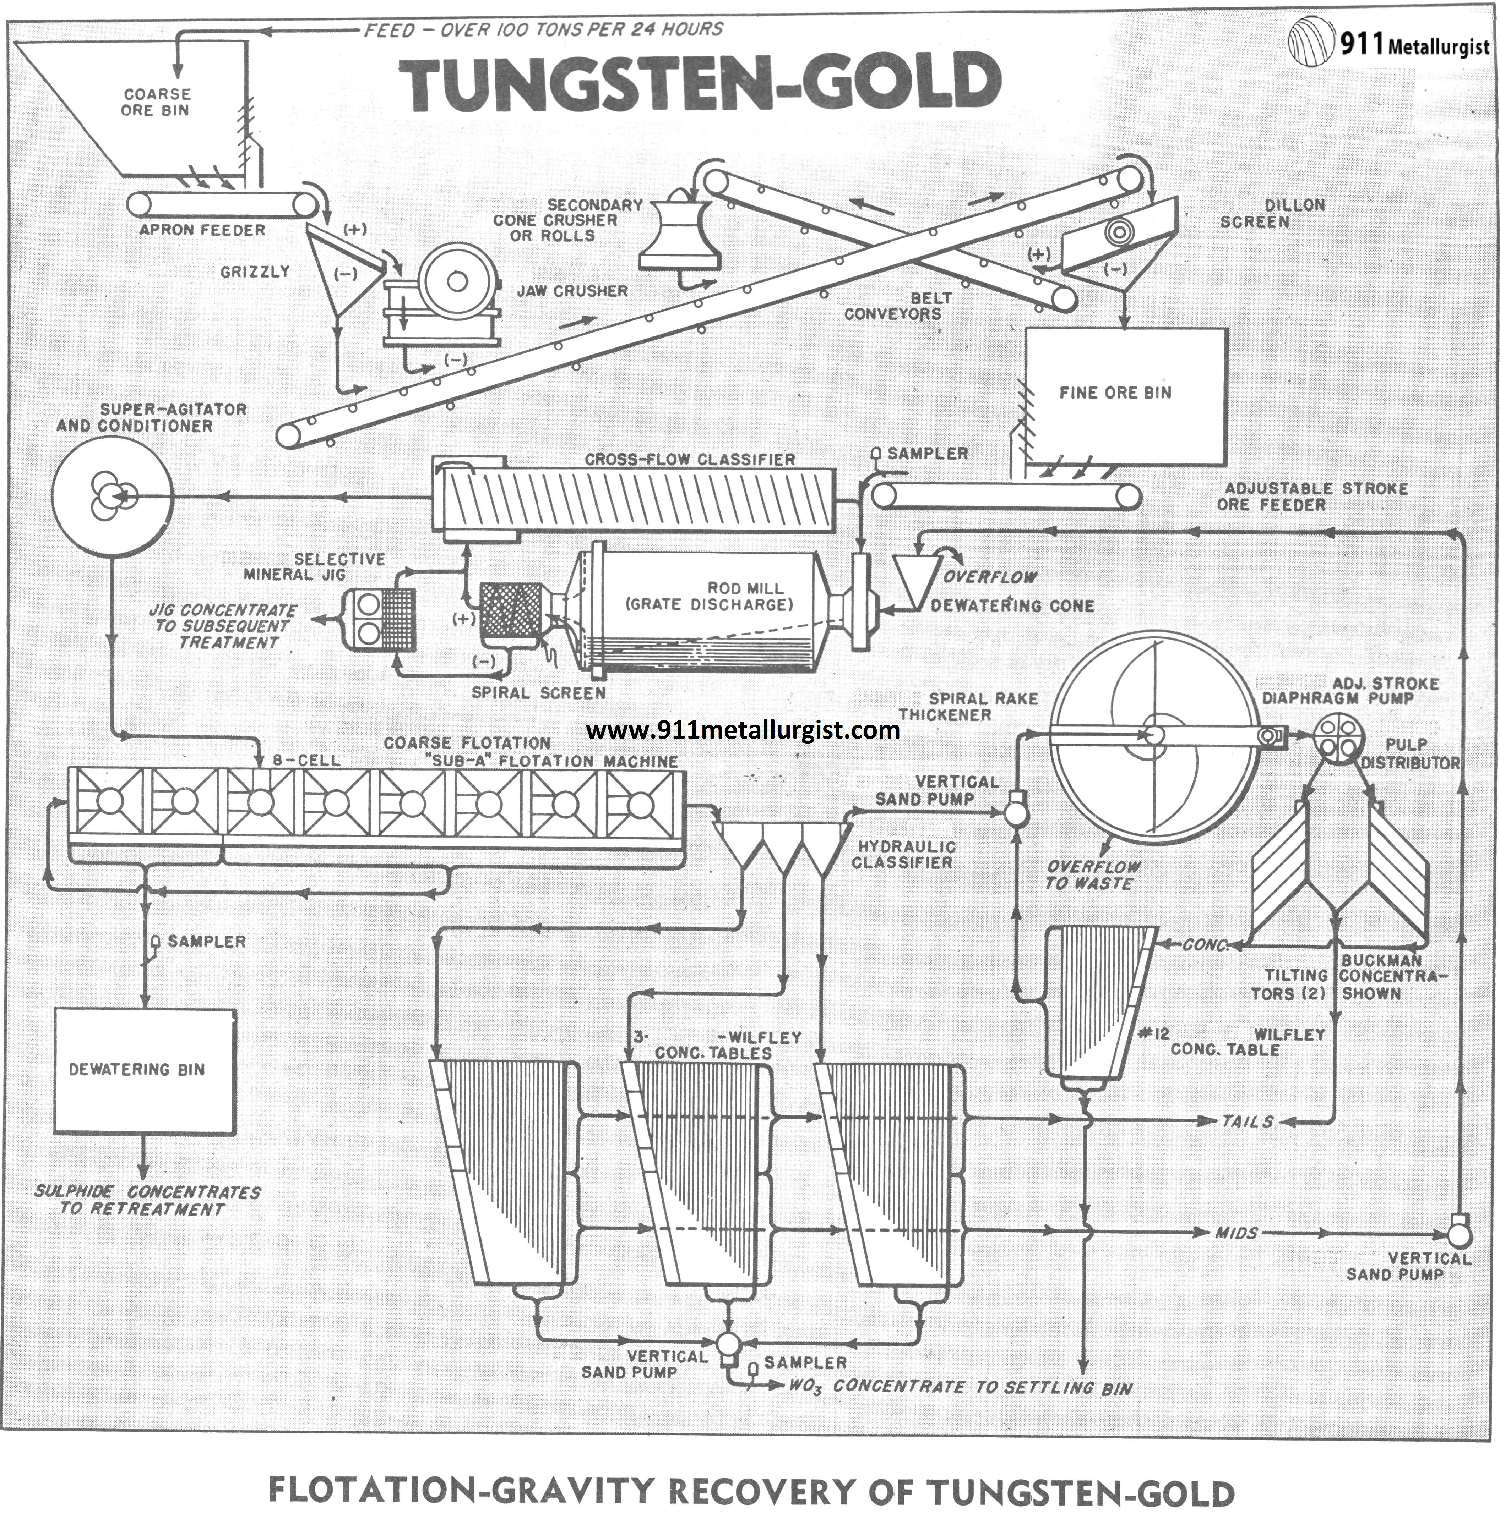 Flotation-Gravity Recovery of Tungsten-Gold